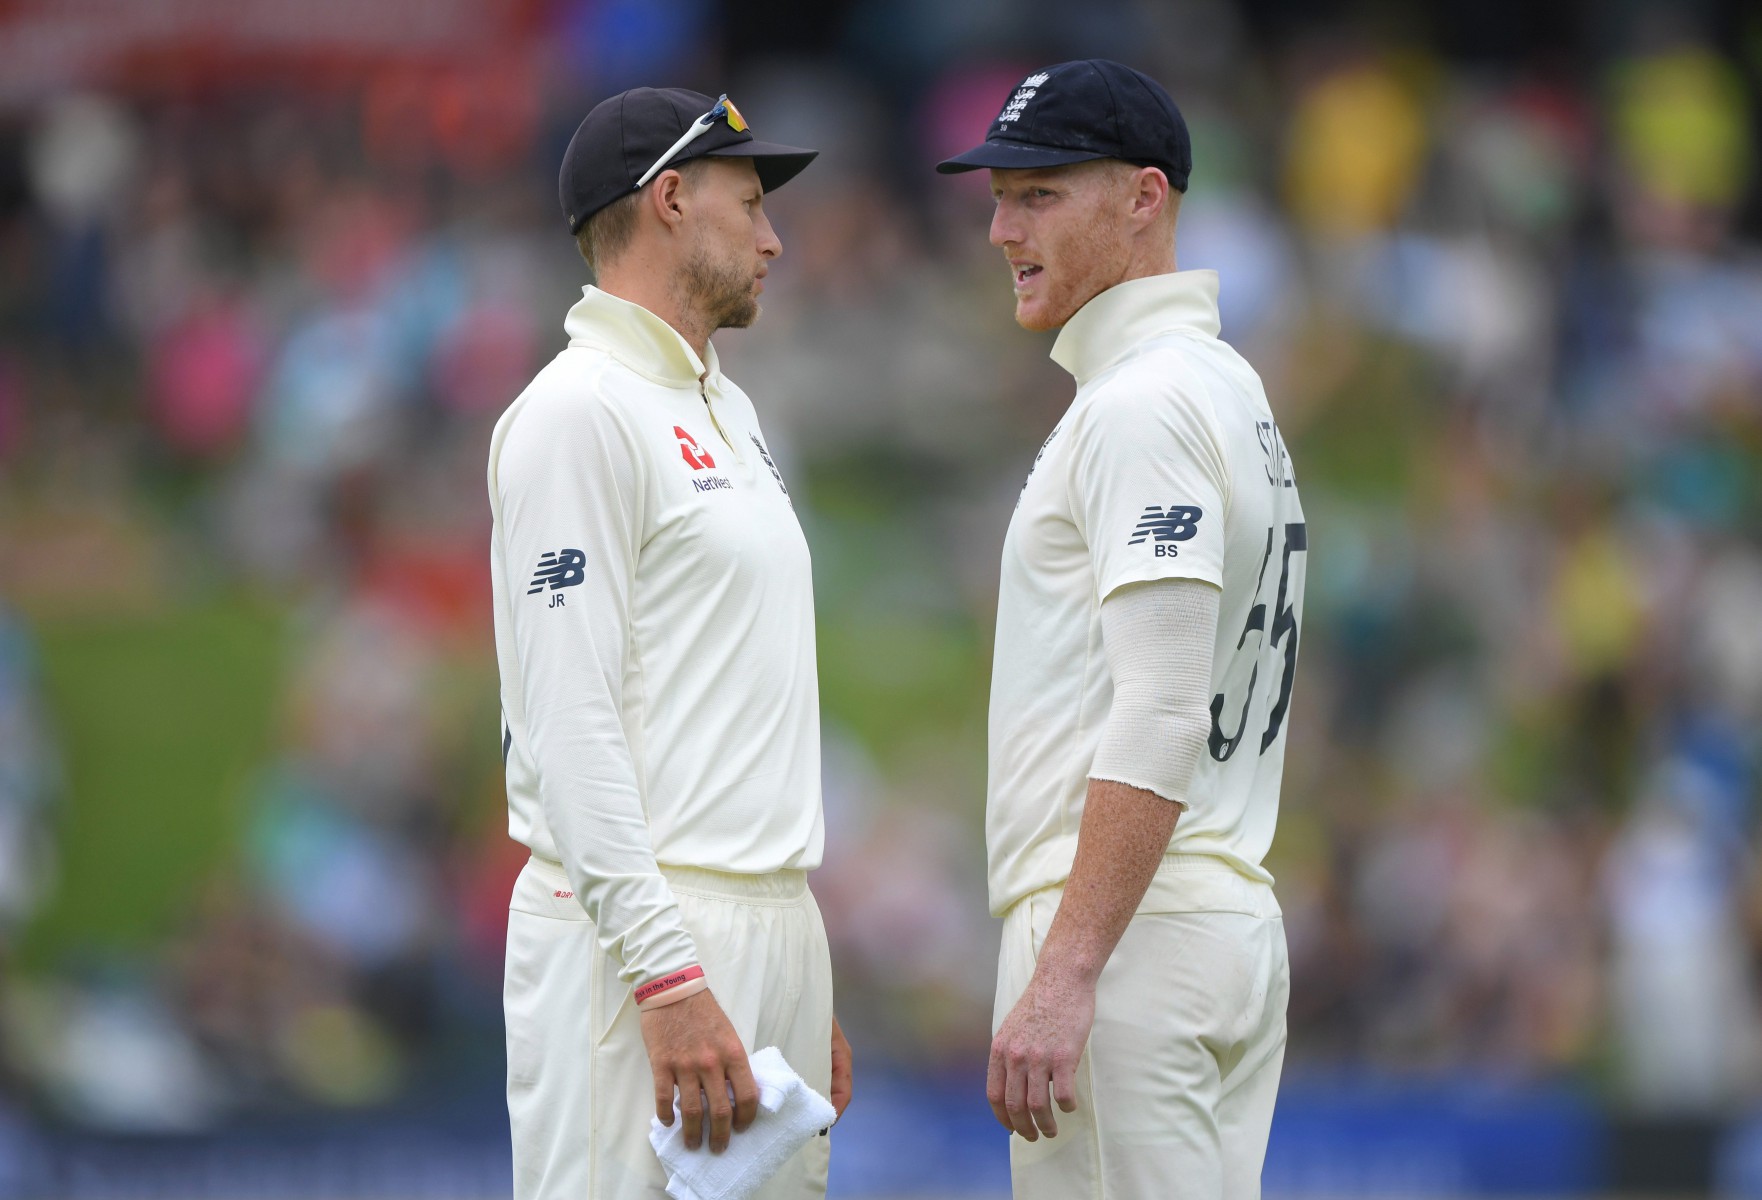 , England given massive 376 to win first test in South Africa as Joe Root hopes for spirit of Headingley